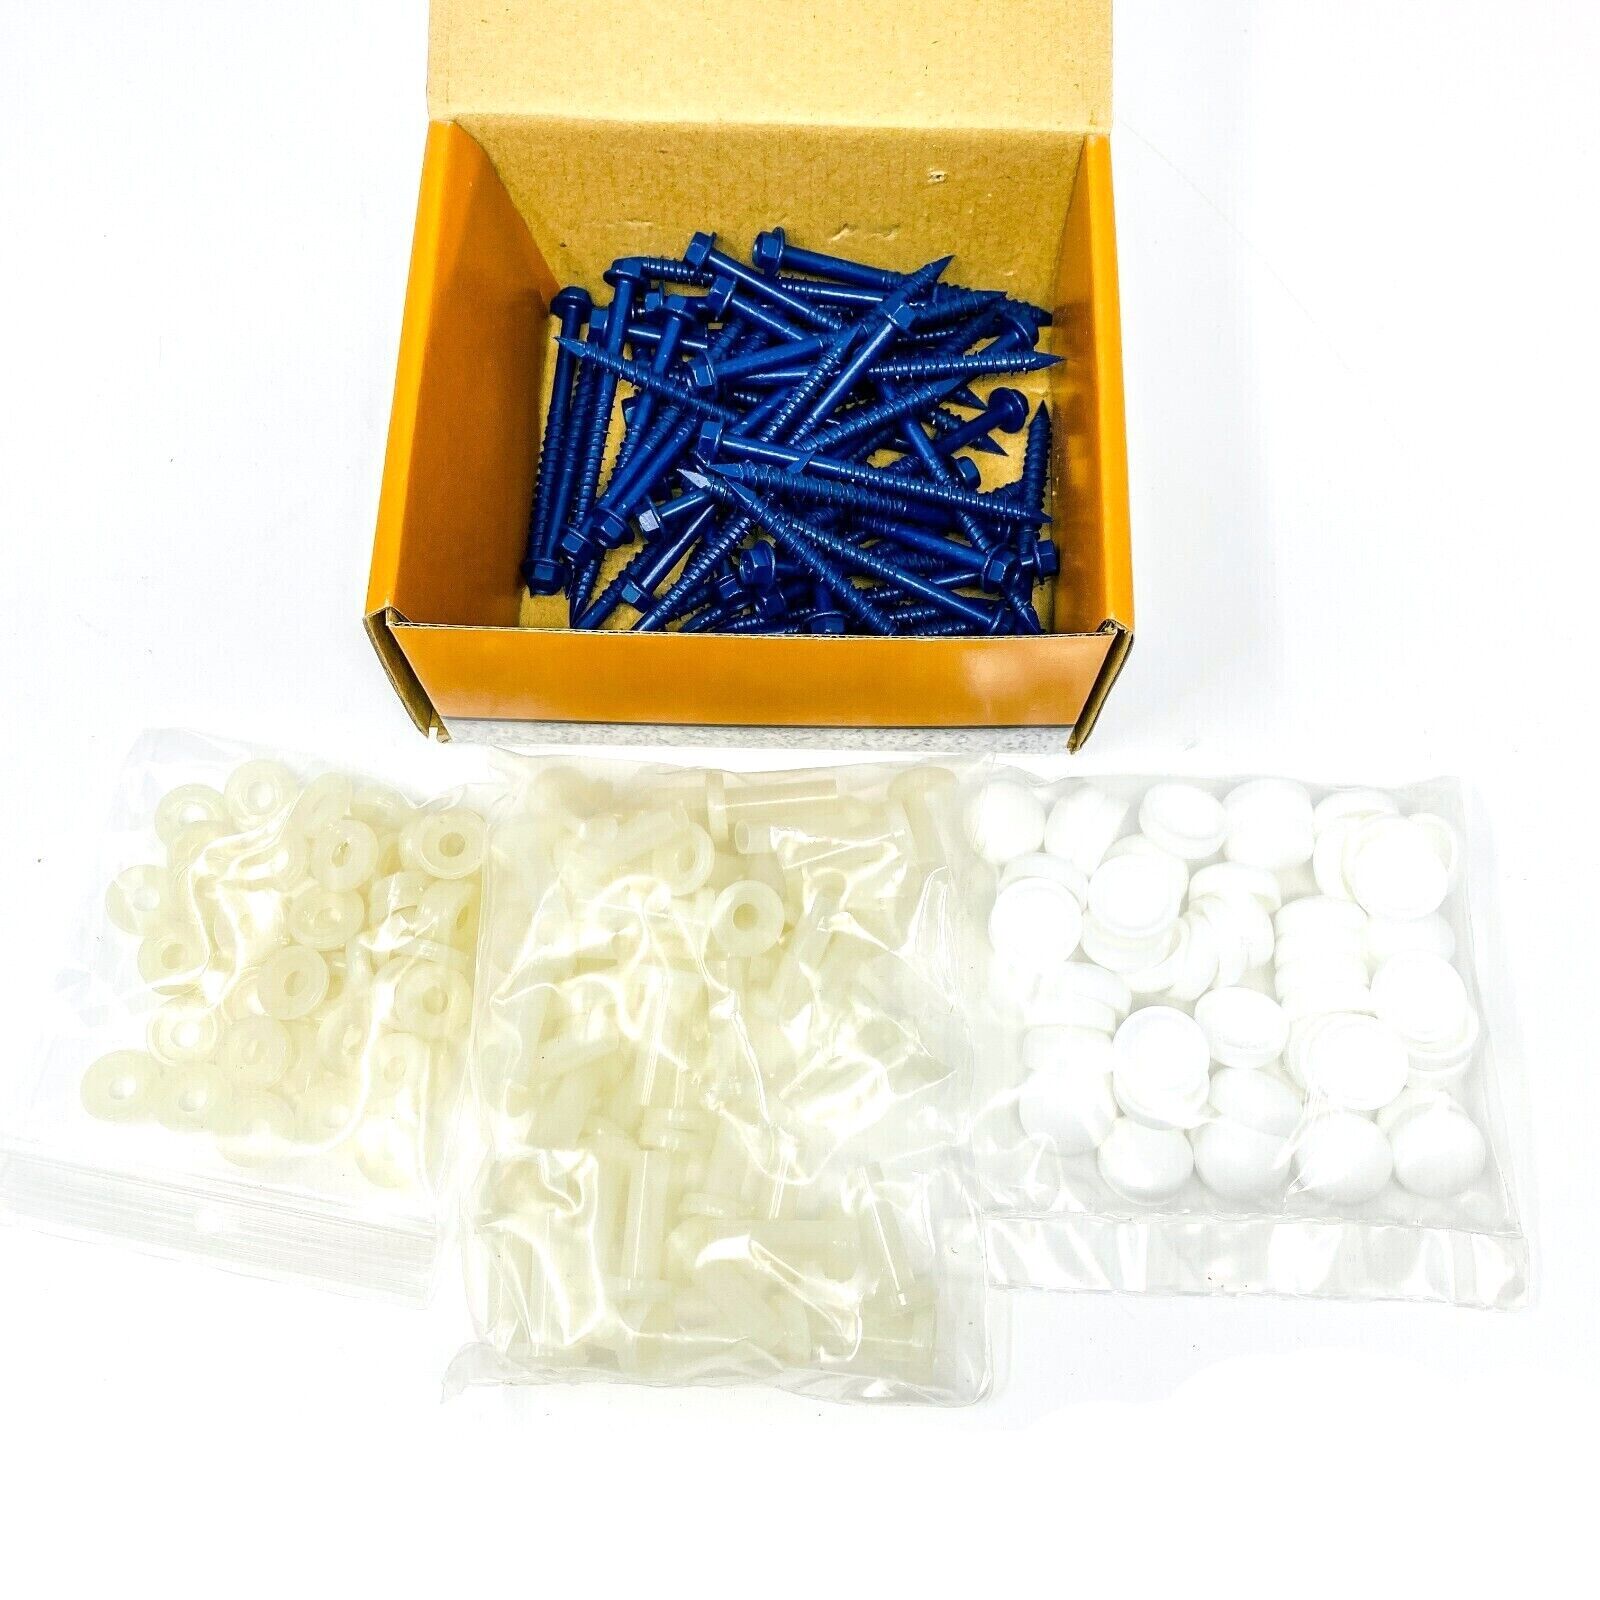 200 pcs Set Pro-Tect WHITE Blue-Tap Concrete Screws, Sleeves, Washers and Caps PRO-TECT Does Not Apply - фотография #4